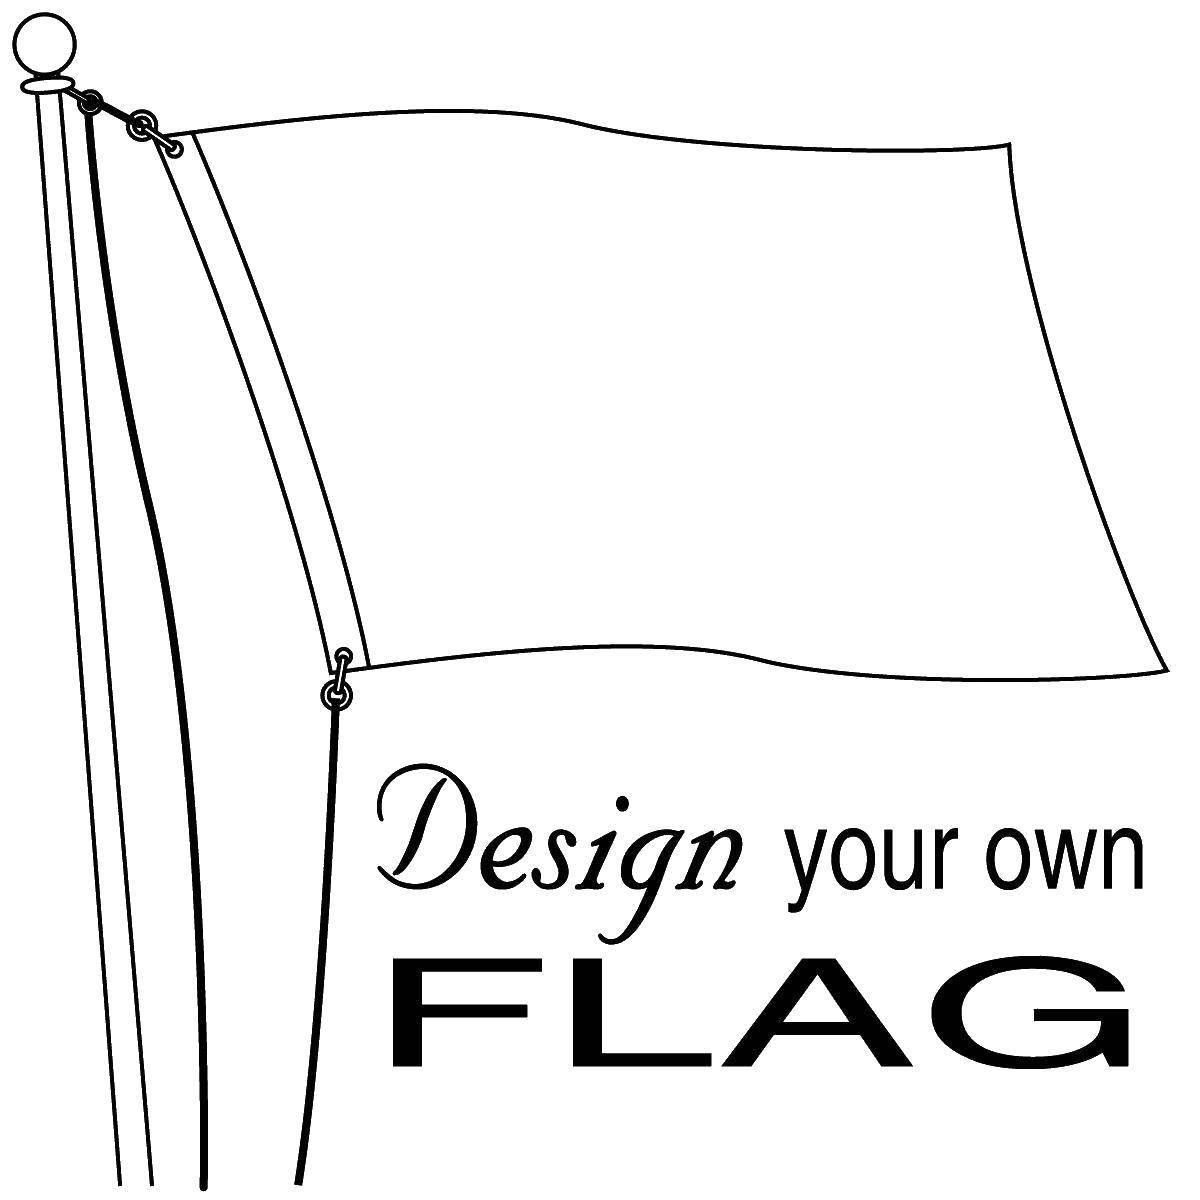 Coloring Think of your own flag. Category English. Tags:  flag, English.